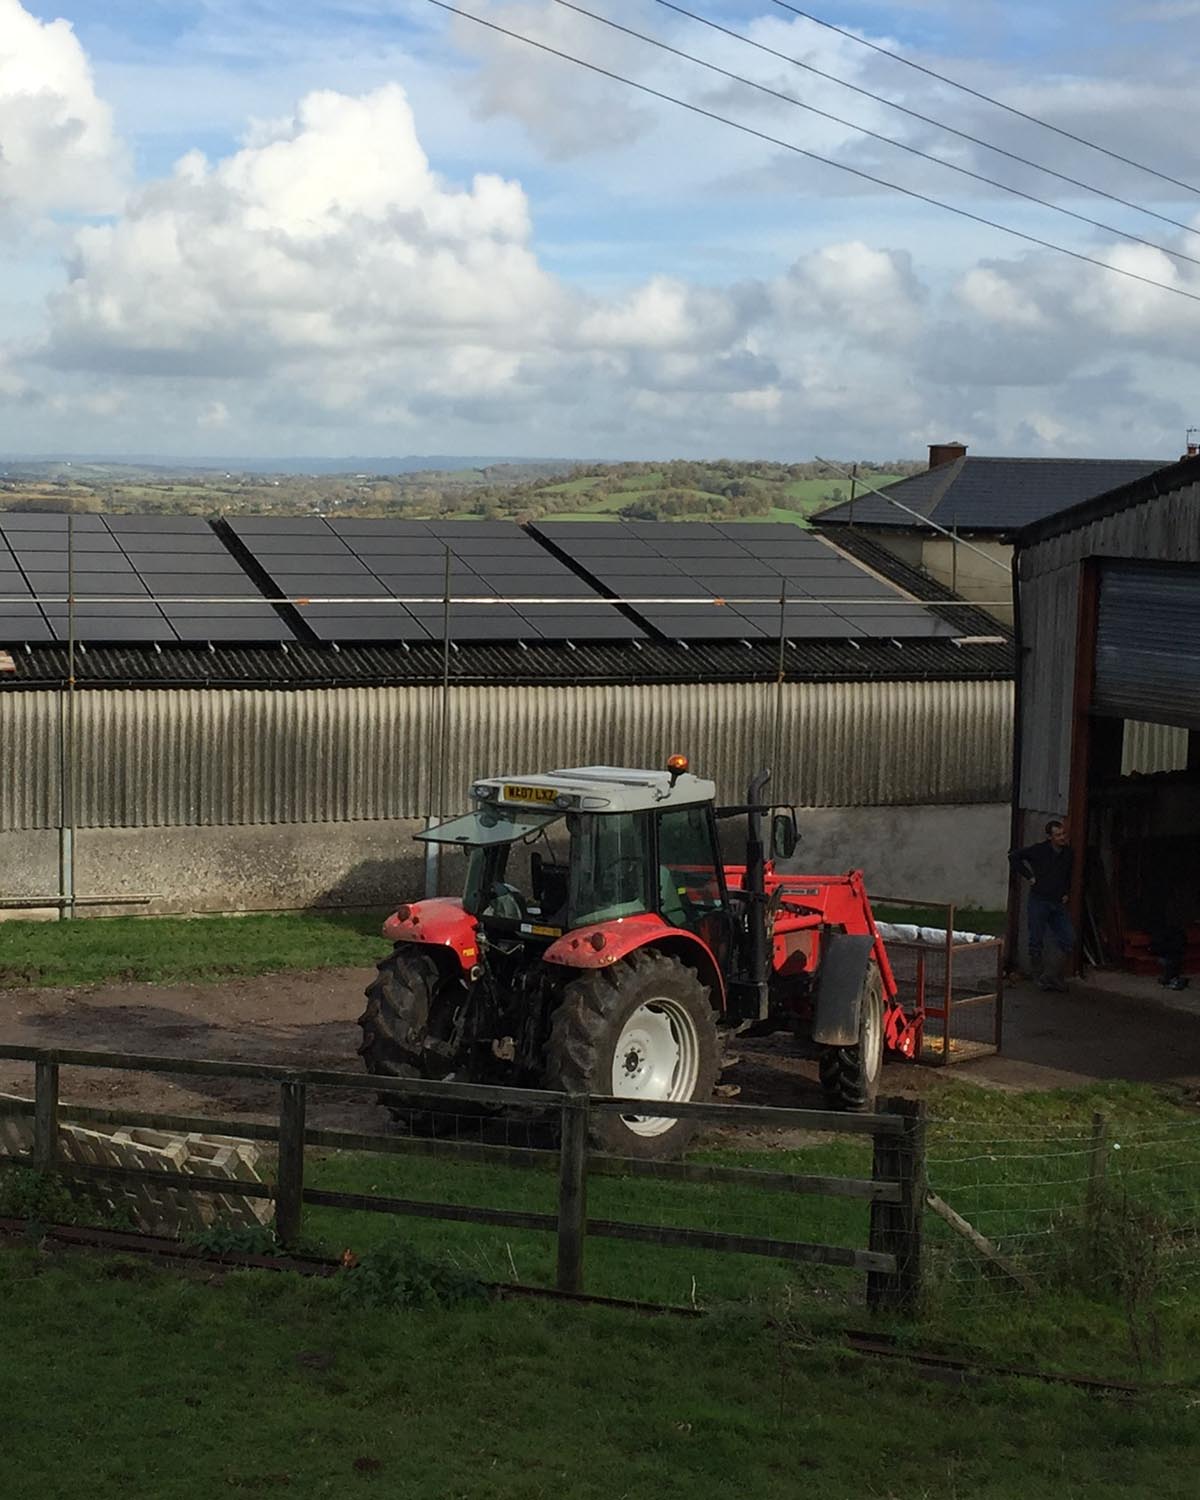 Barn and Tractor. NBG Digital Home. Electric Vehicle chargers, Solar and Heat Pumps, General Electrical Services in the South West.